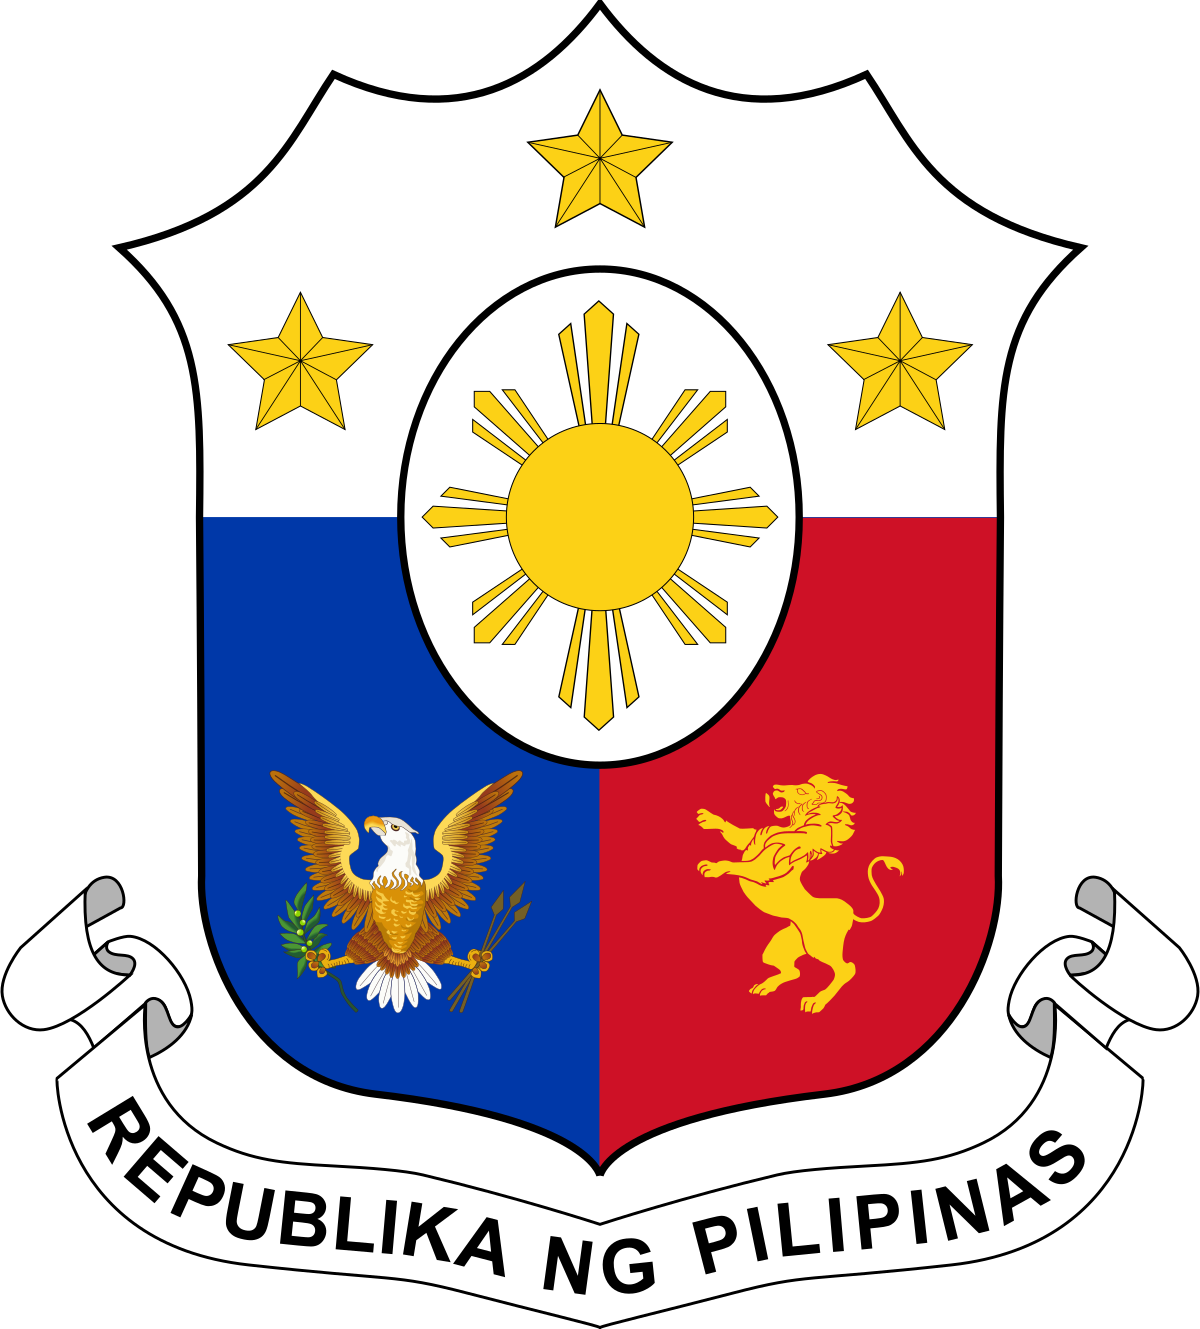 Coat of arms of the Philippines.